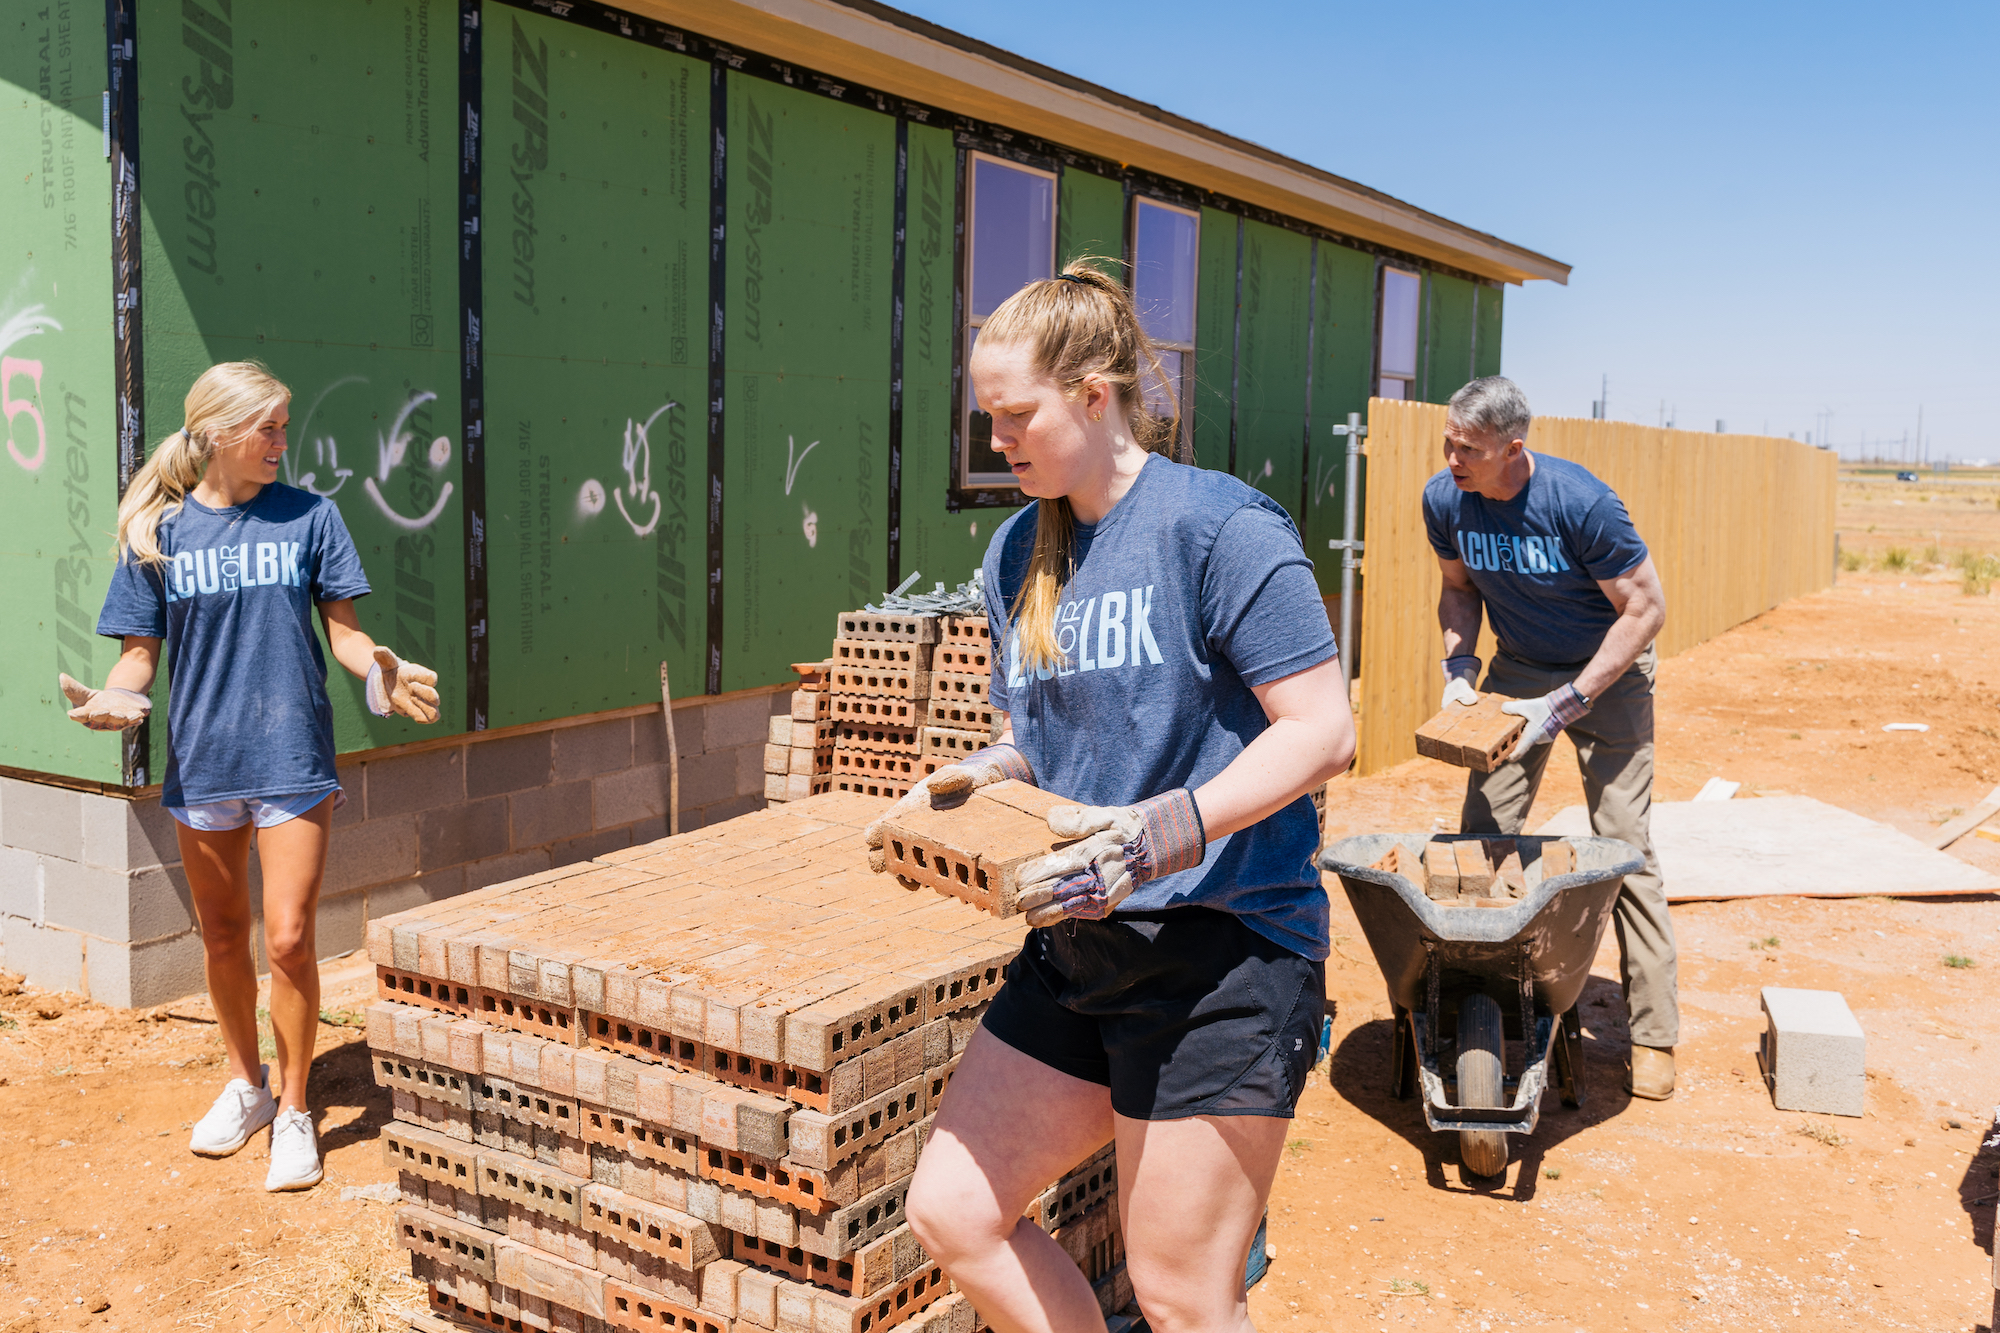 two young women carry bricks at a construction site, while an older gentleman places more bricks into a wheelbarrow behind them